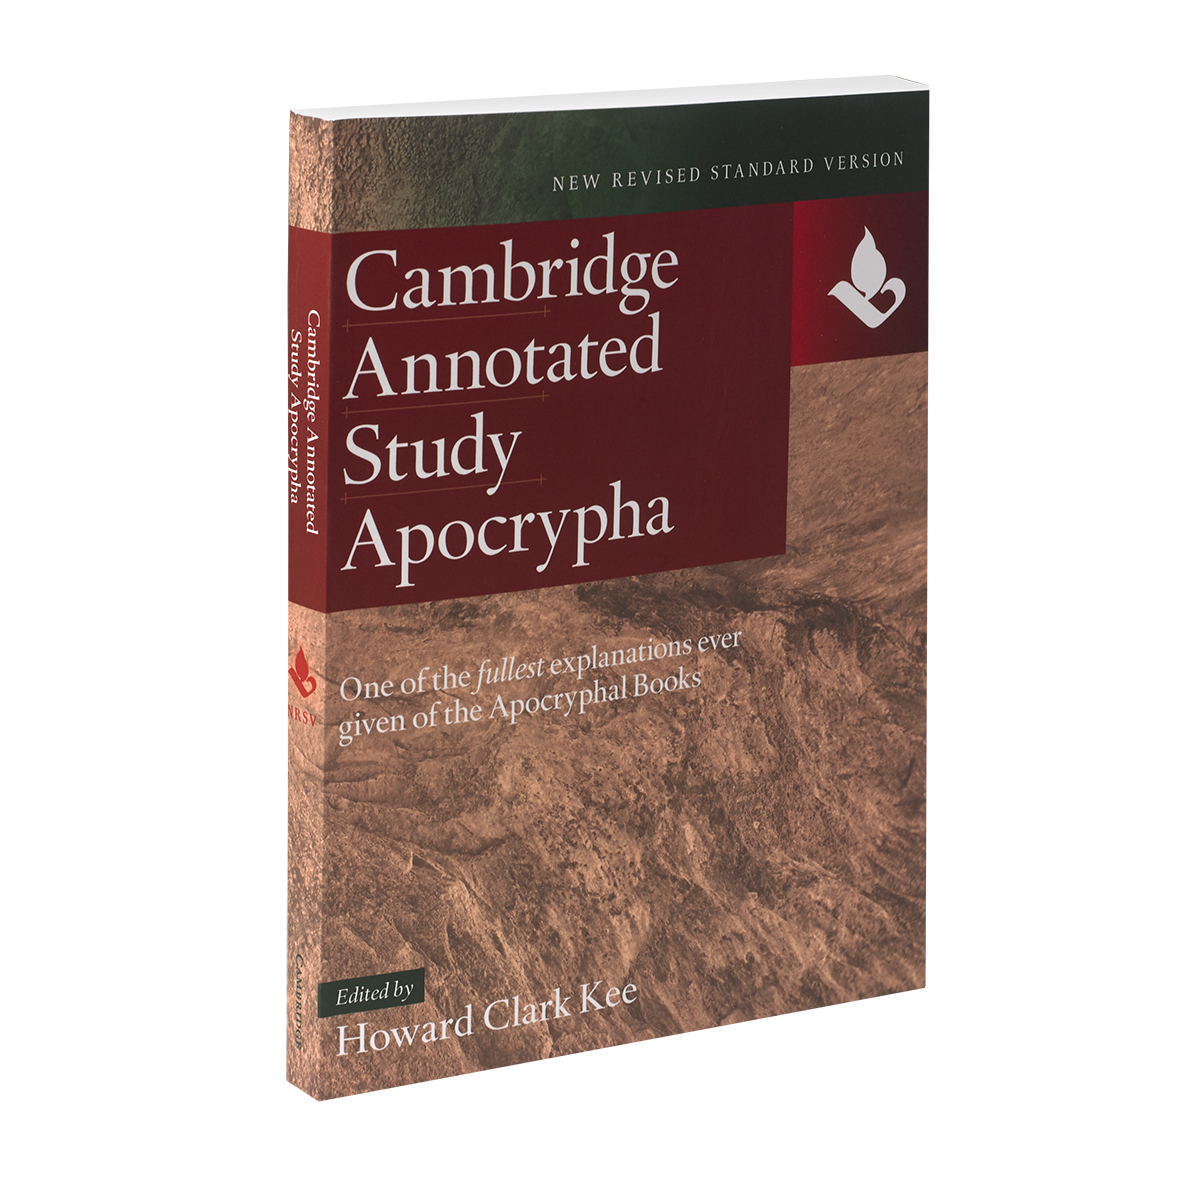 Red/ brown book, upright — cover of the Cambridge Annotated Study Apocrypha